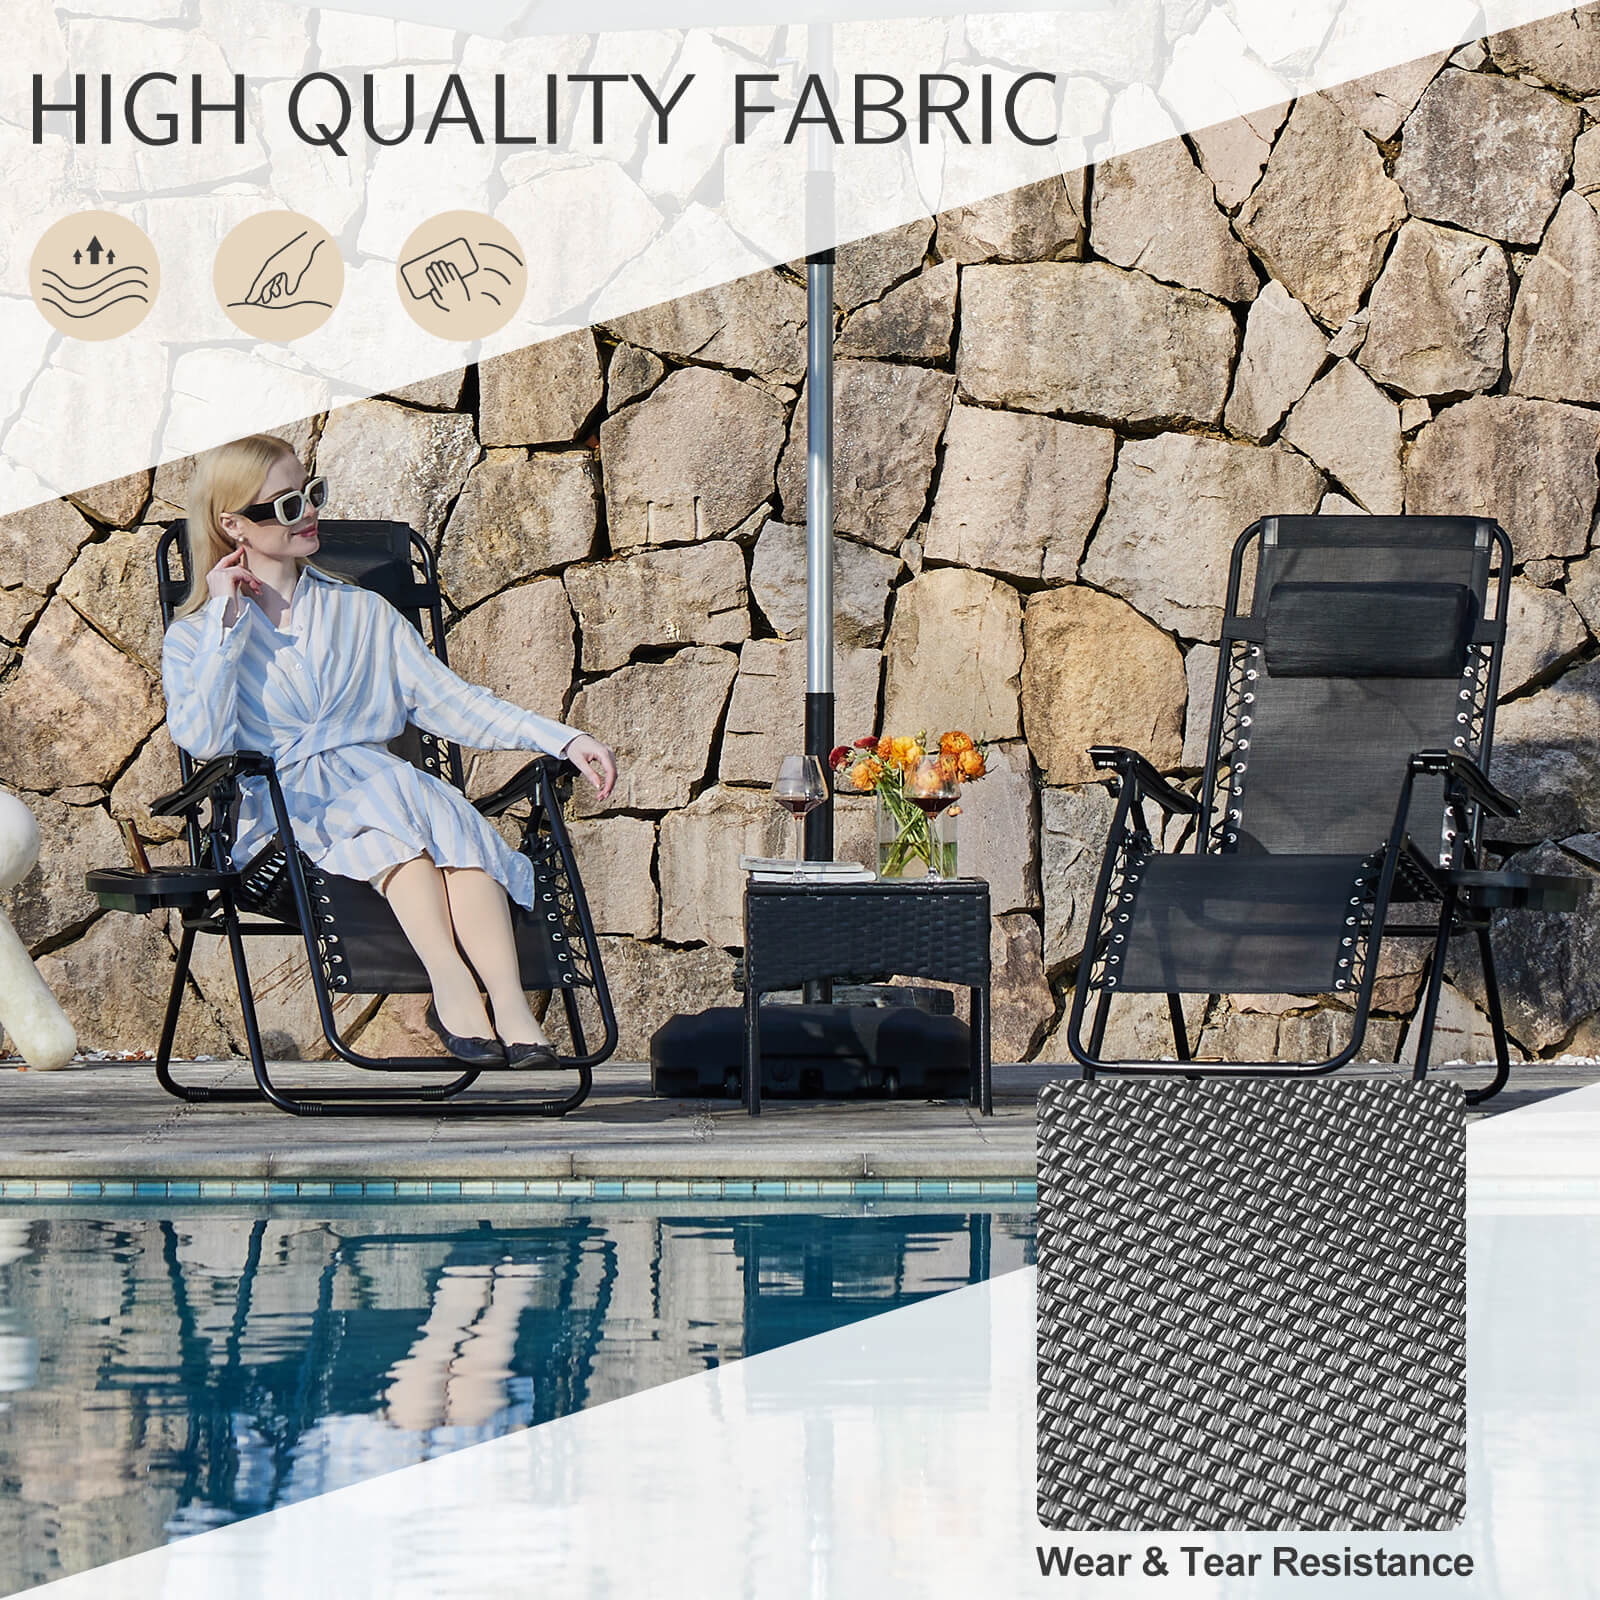 Zero Gravity Chairs - Set of 2 portable recliners with adjustable steel mesh for beach, camping, patio and lawn.